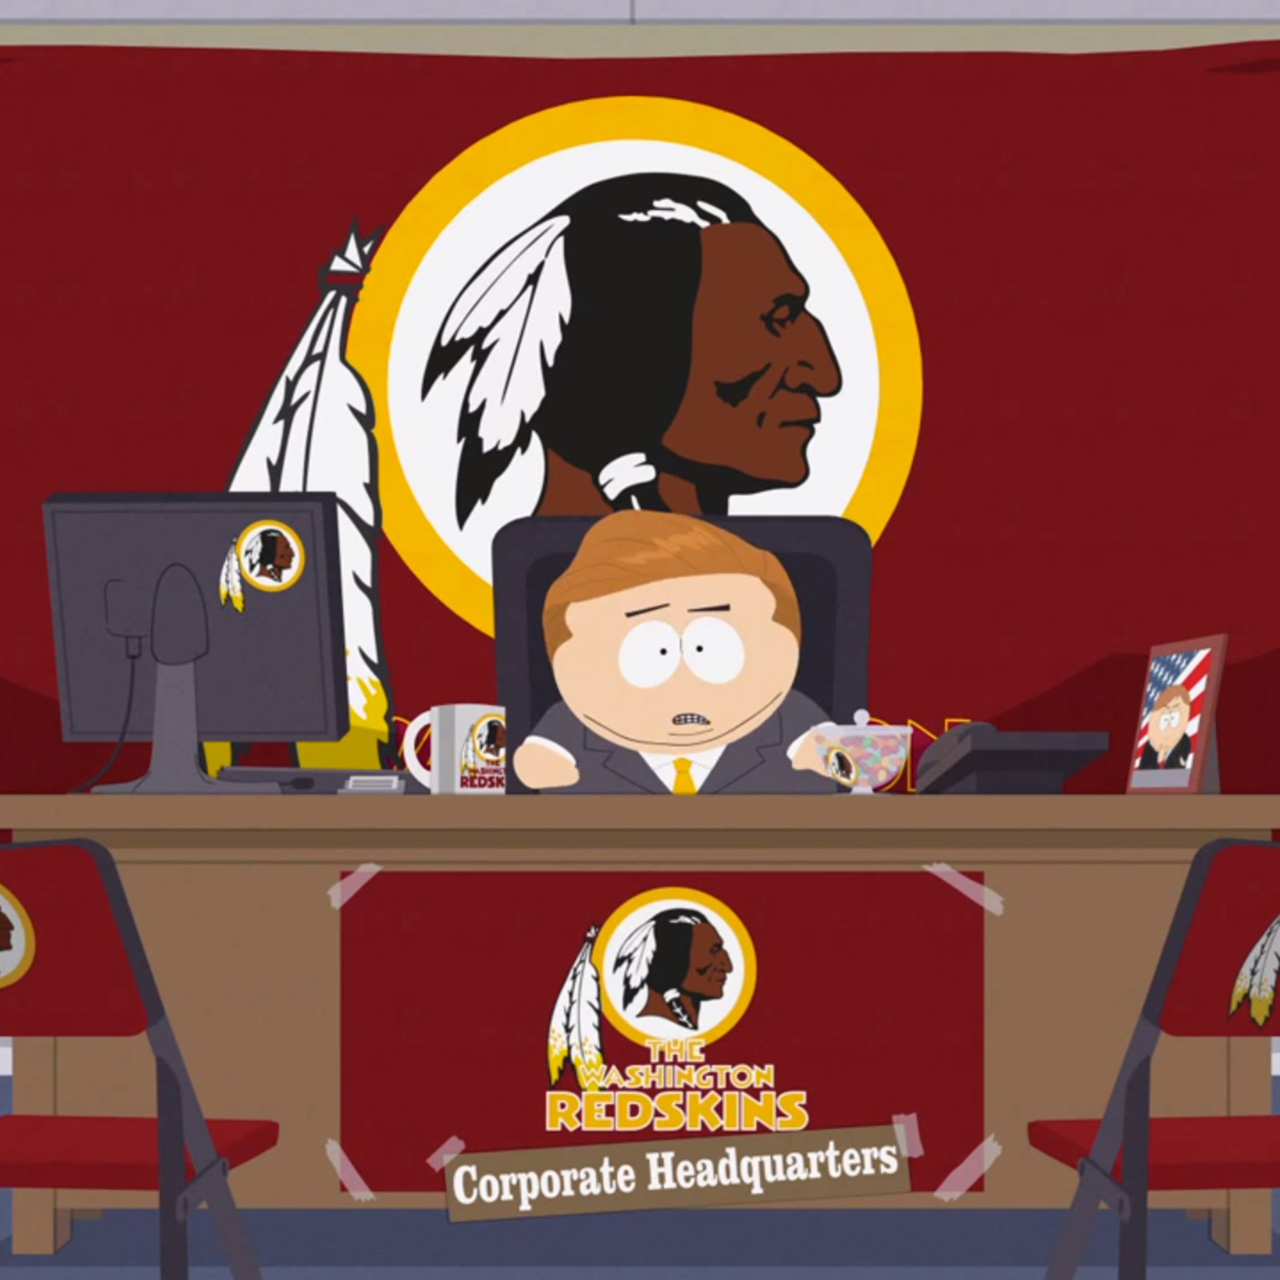 South Park's Eric Theodore Cartman owns the Washington Redskins